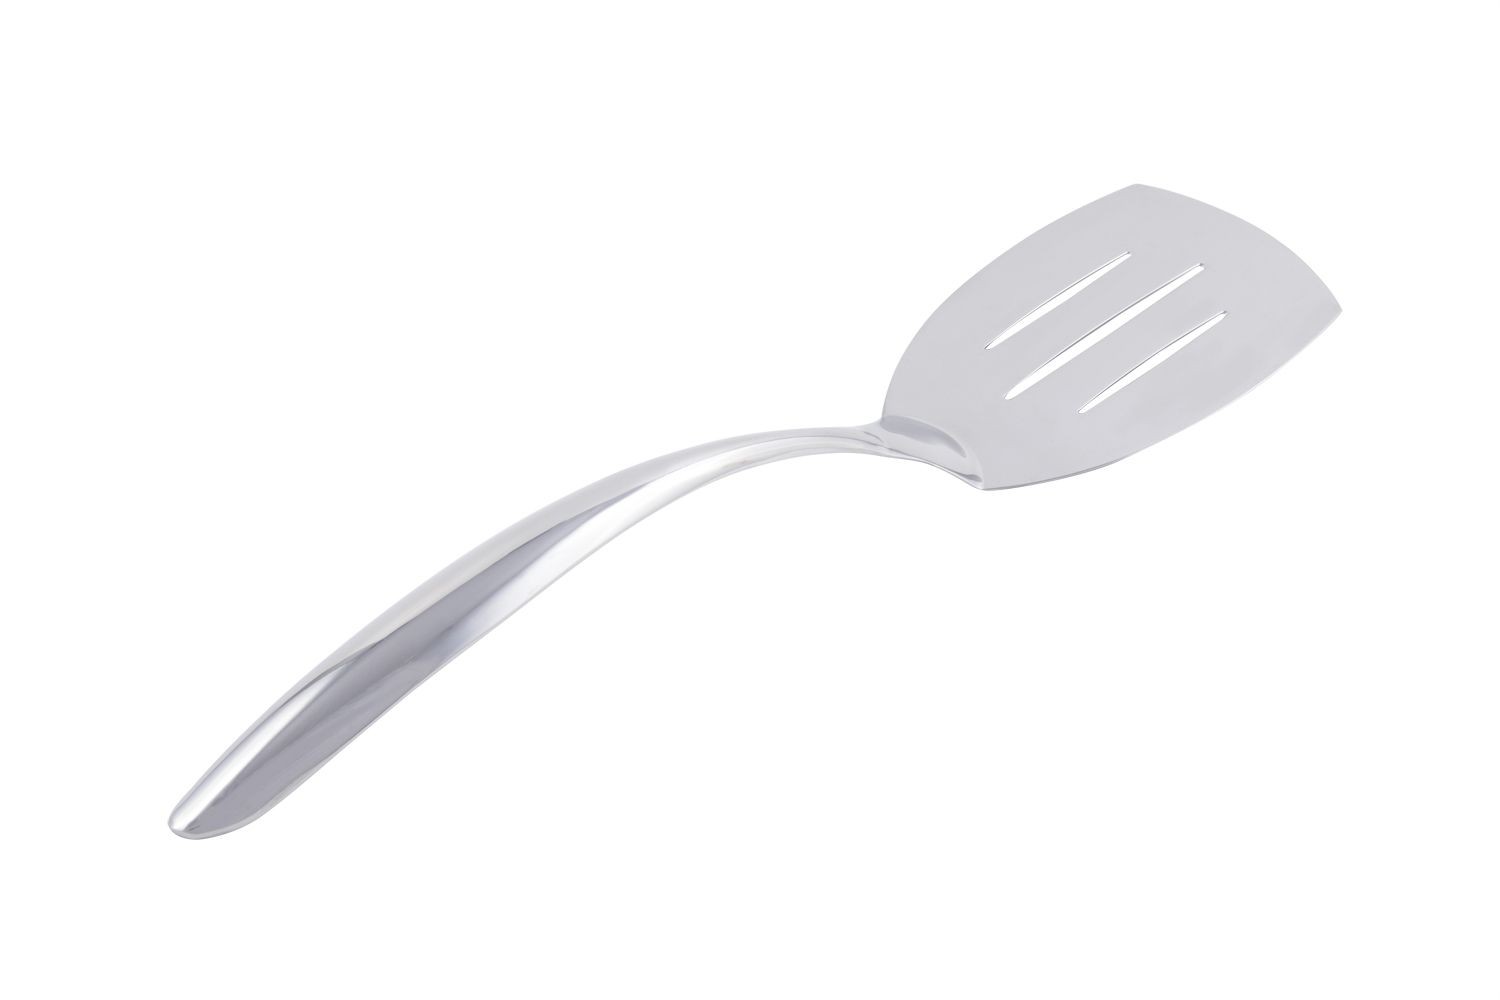 Bon Chef 9460 EZ Use Banquet Serving Slotted Turner with Hollow Cool Handle, 14 3/4"